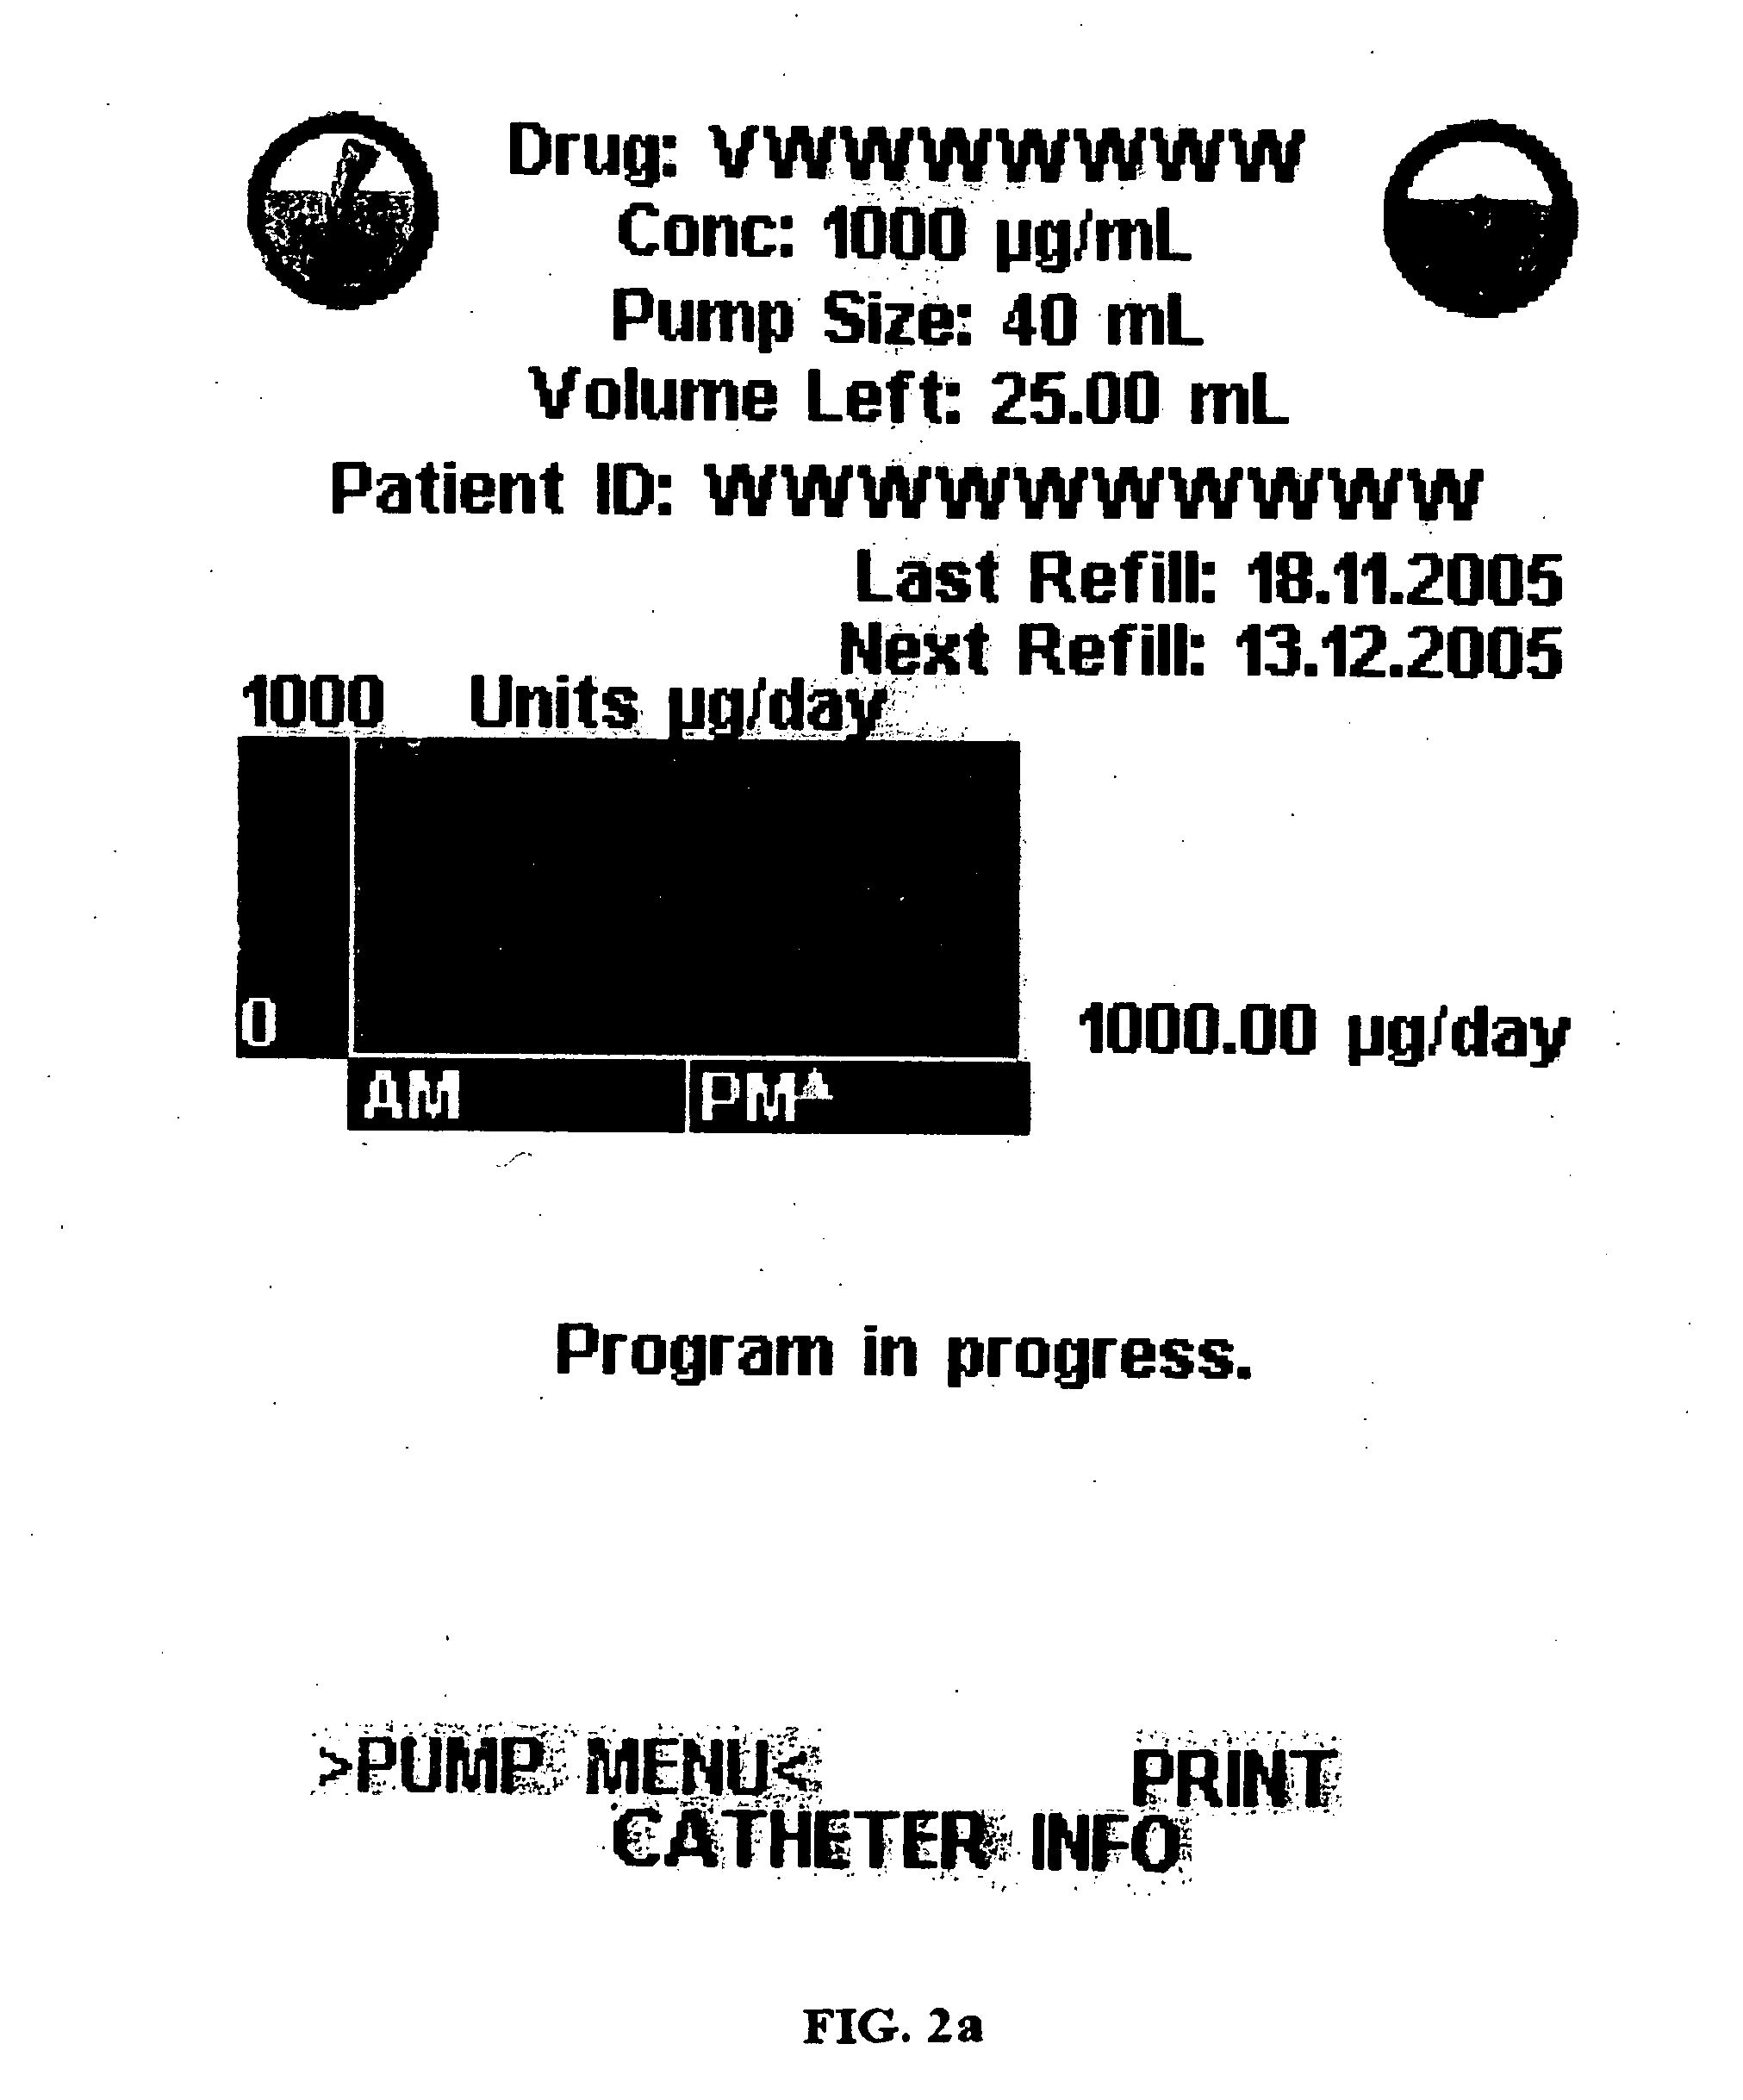 Graphical user interface of an external control device for controlling an implantable medical device while minimizing human error